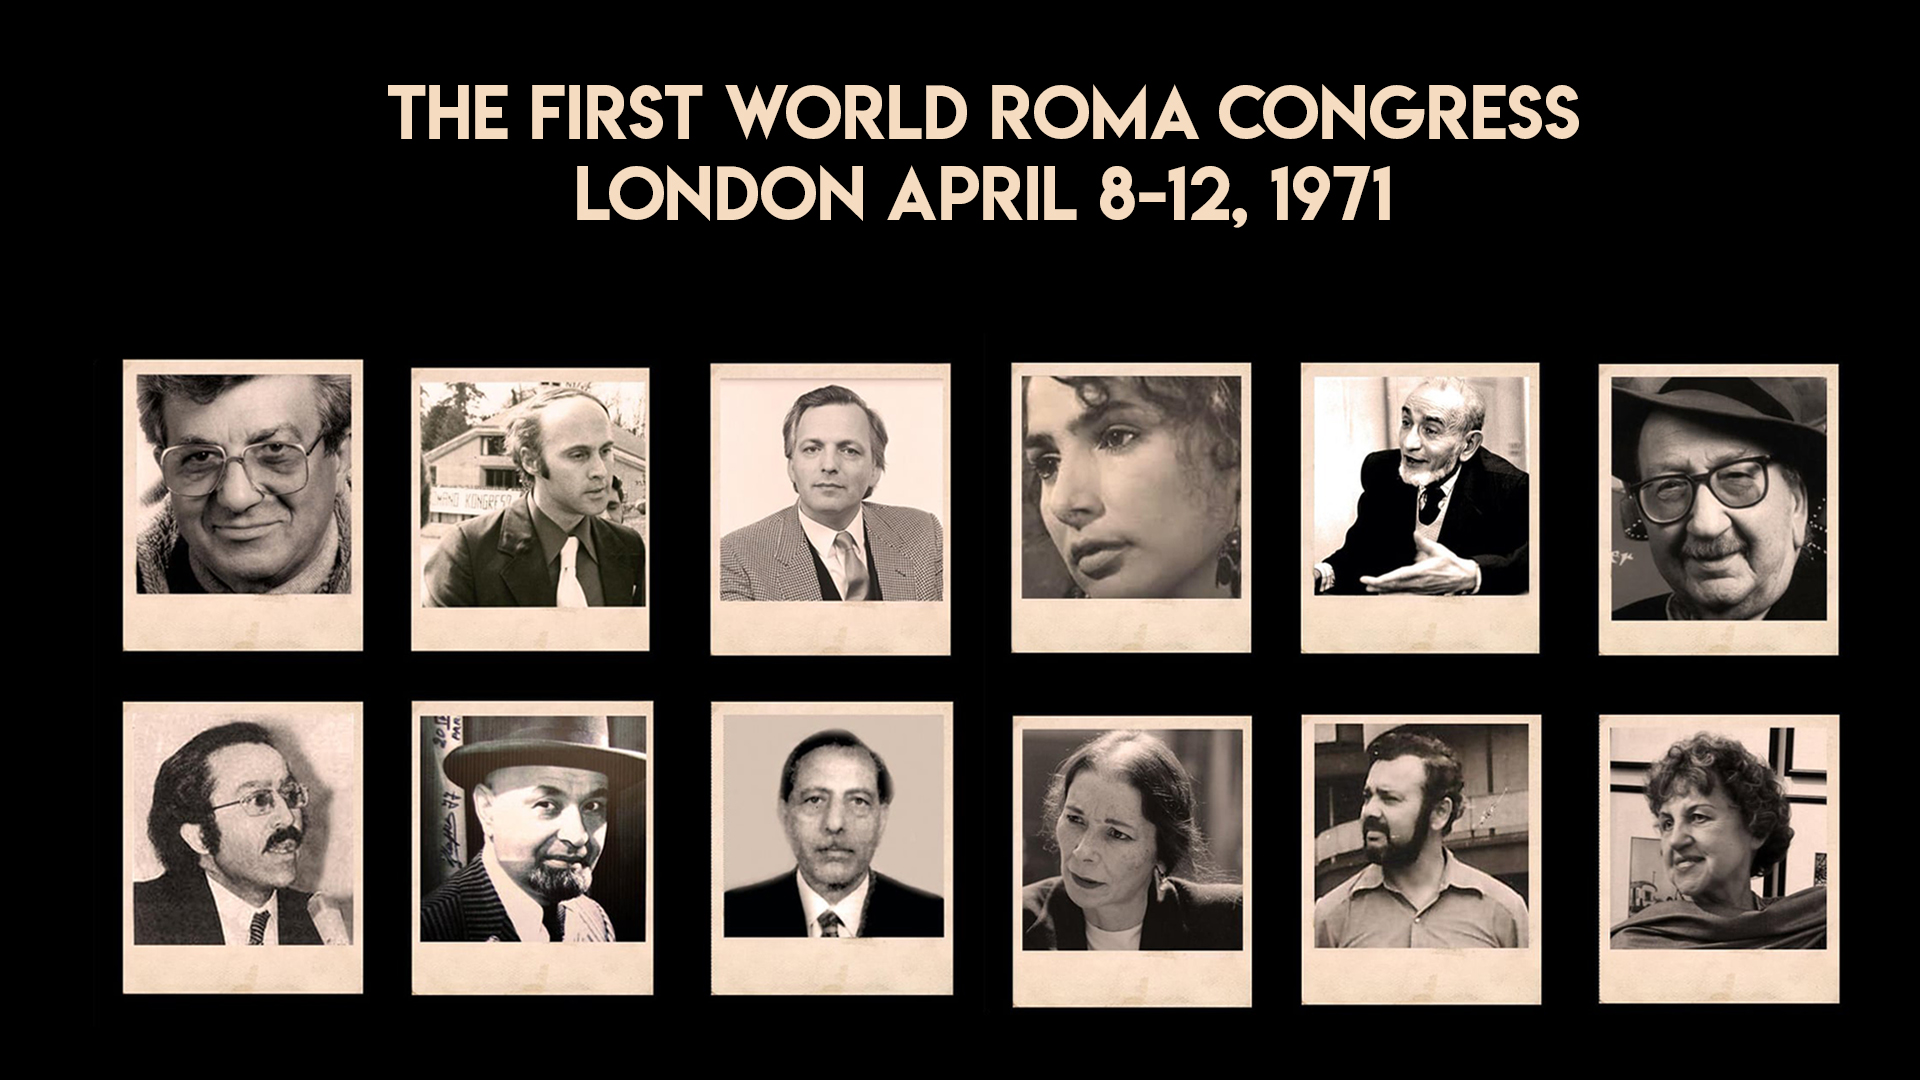 THE FIRST WORLD ROMA CONGRESS 